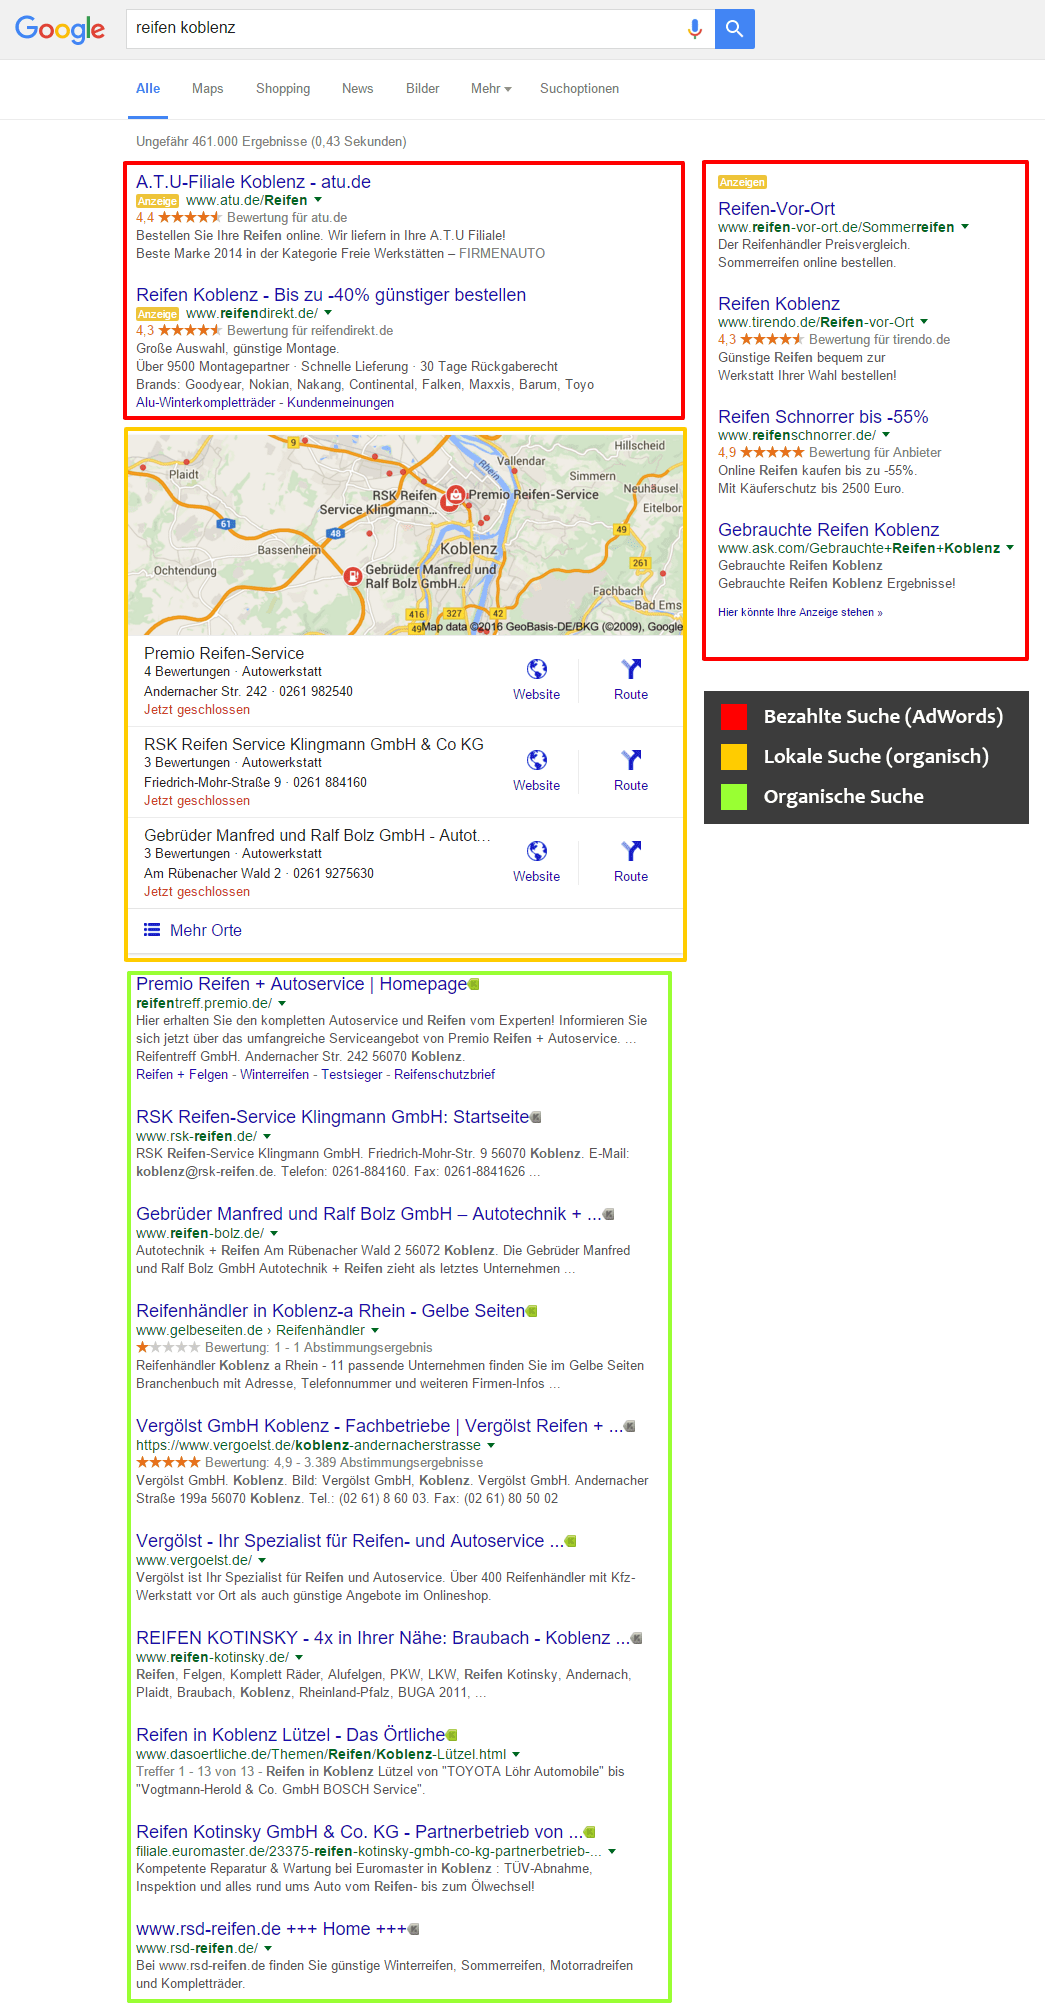 Paid Search, Organic Search & Local Search